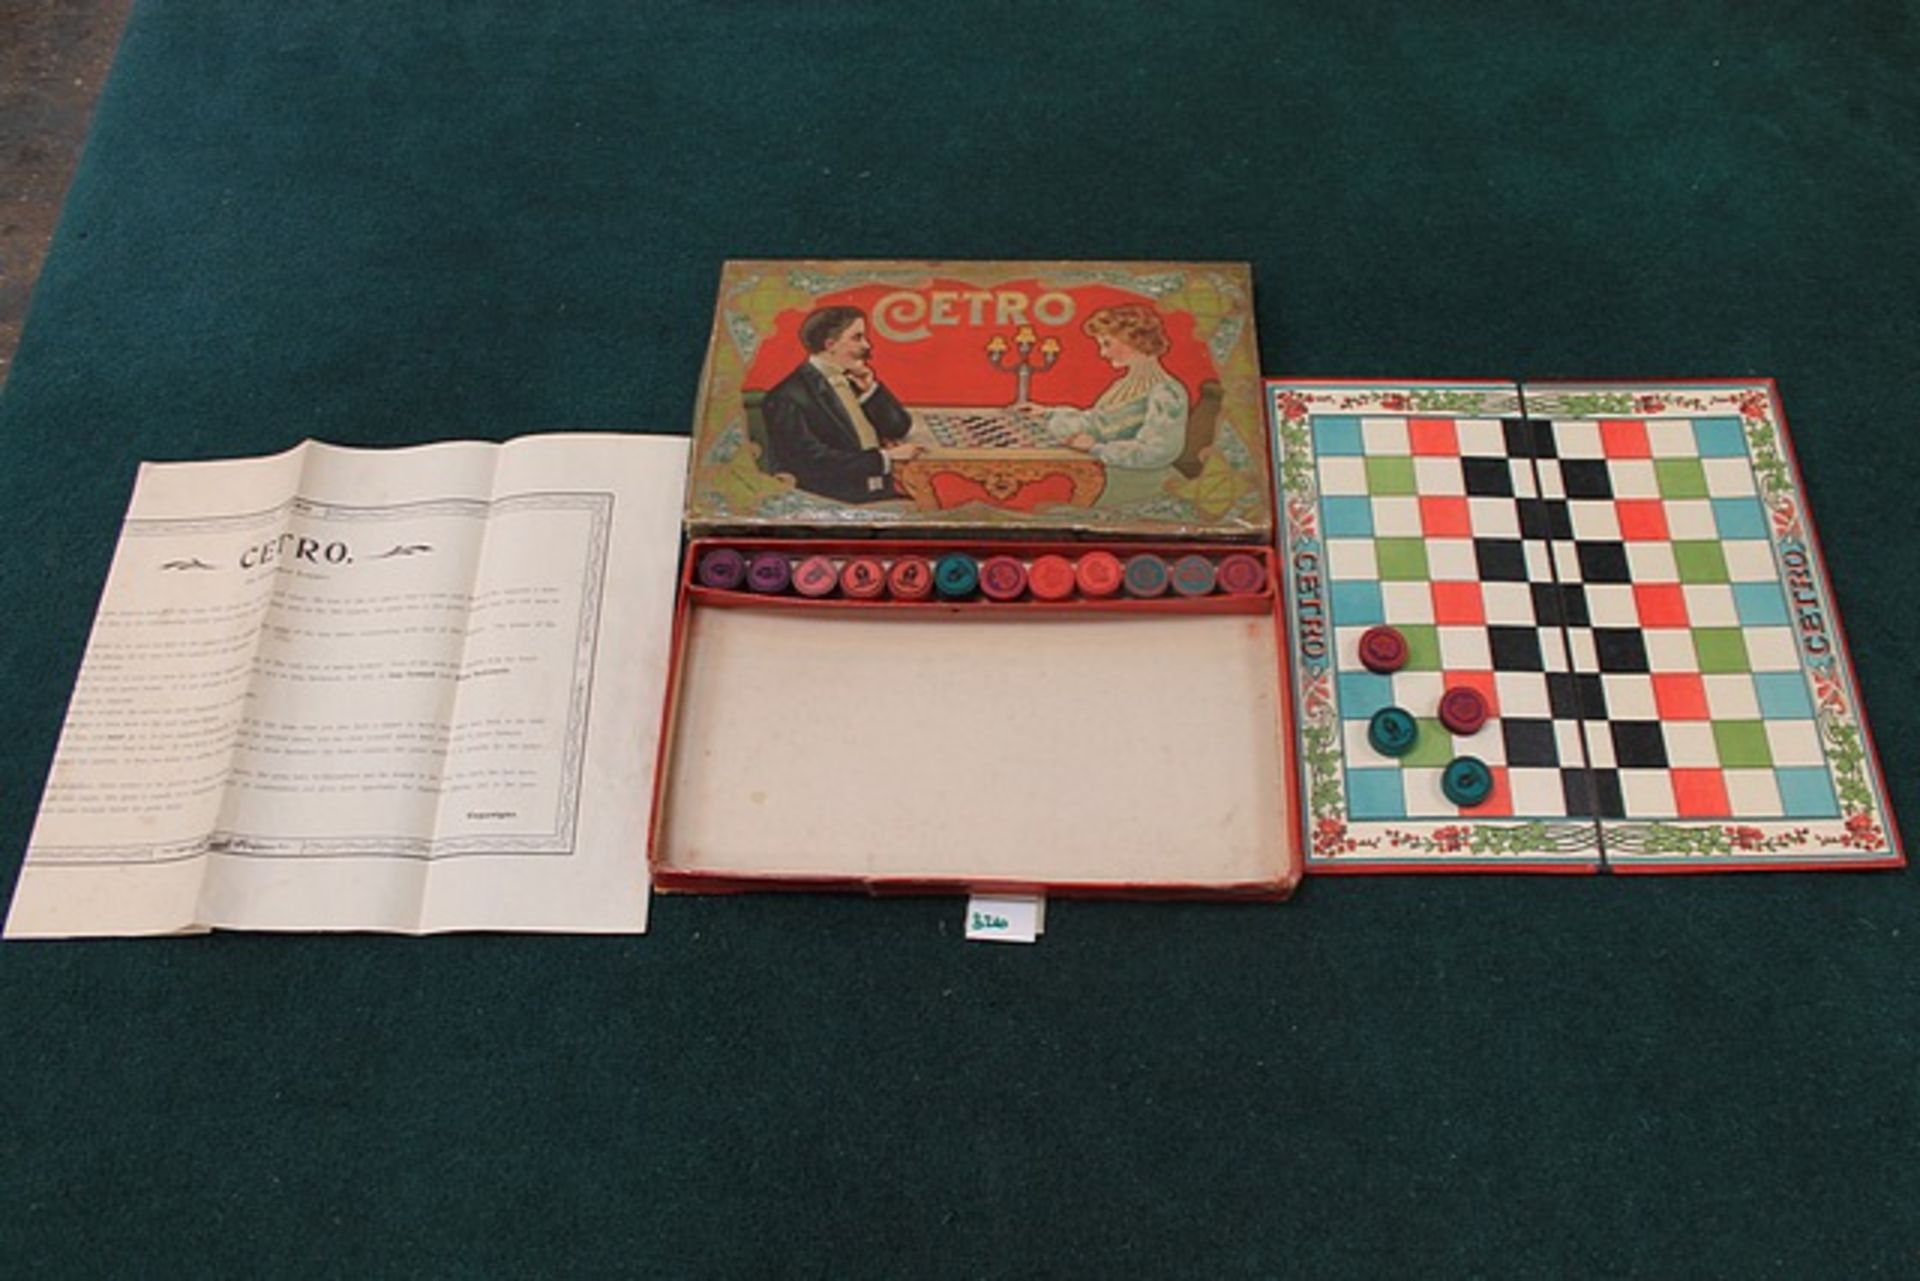 Cetro (1903) Board Game In Box The Players Have To Get Their 14 Playing Pieces (Crowns And Bishop' - Image 2 of 2